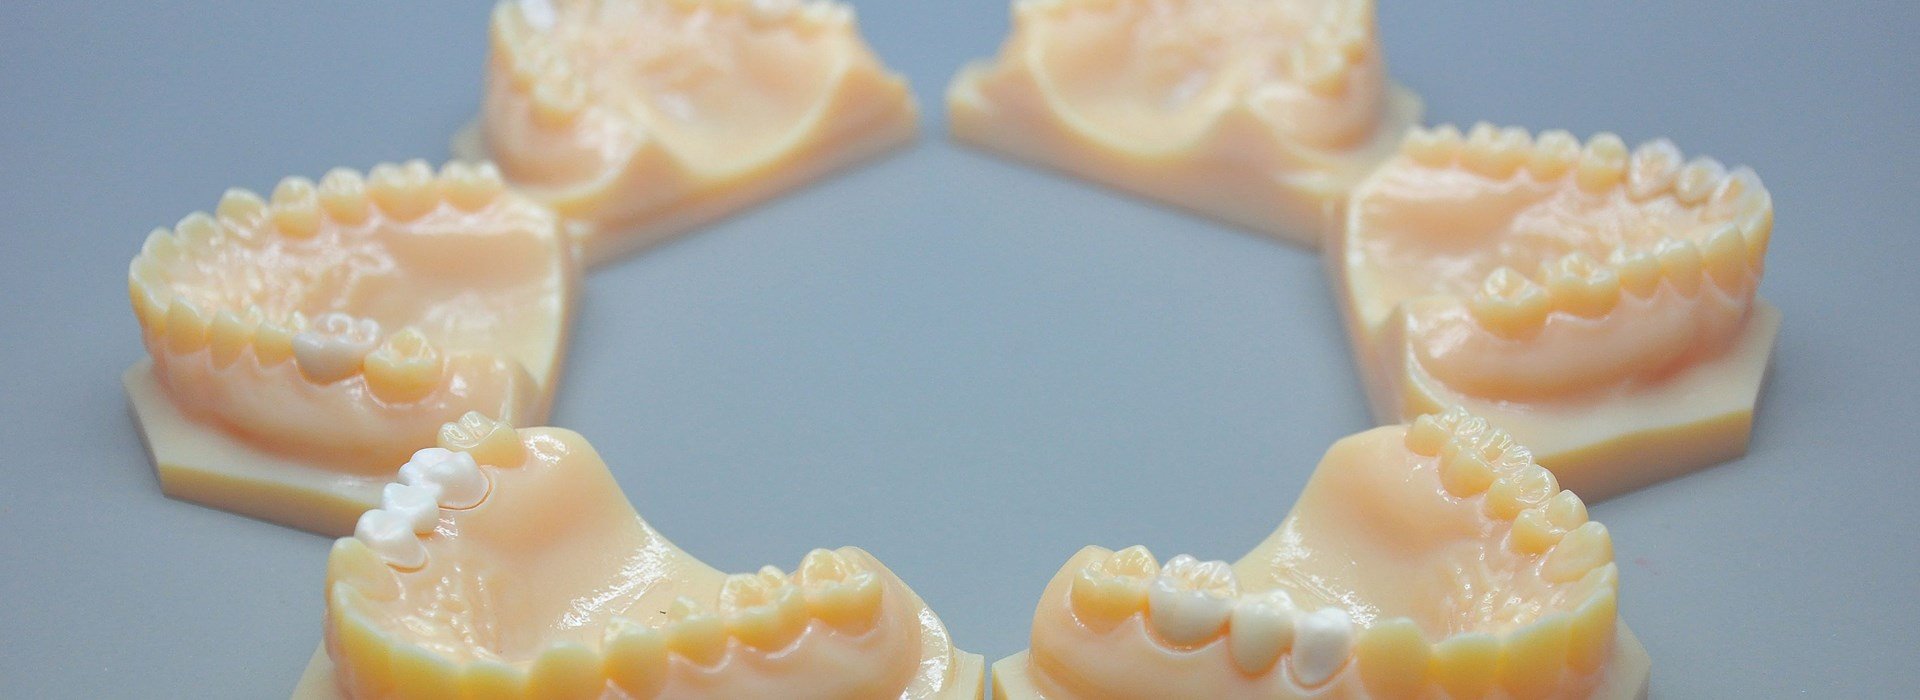 KTJ’s in-house 3D printer streamlined the customization of dental models, a crucial aspect of digital dentistry.